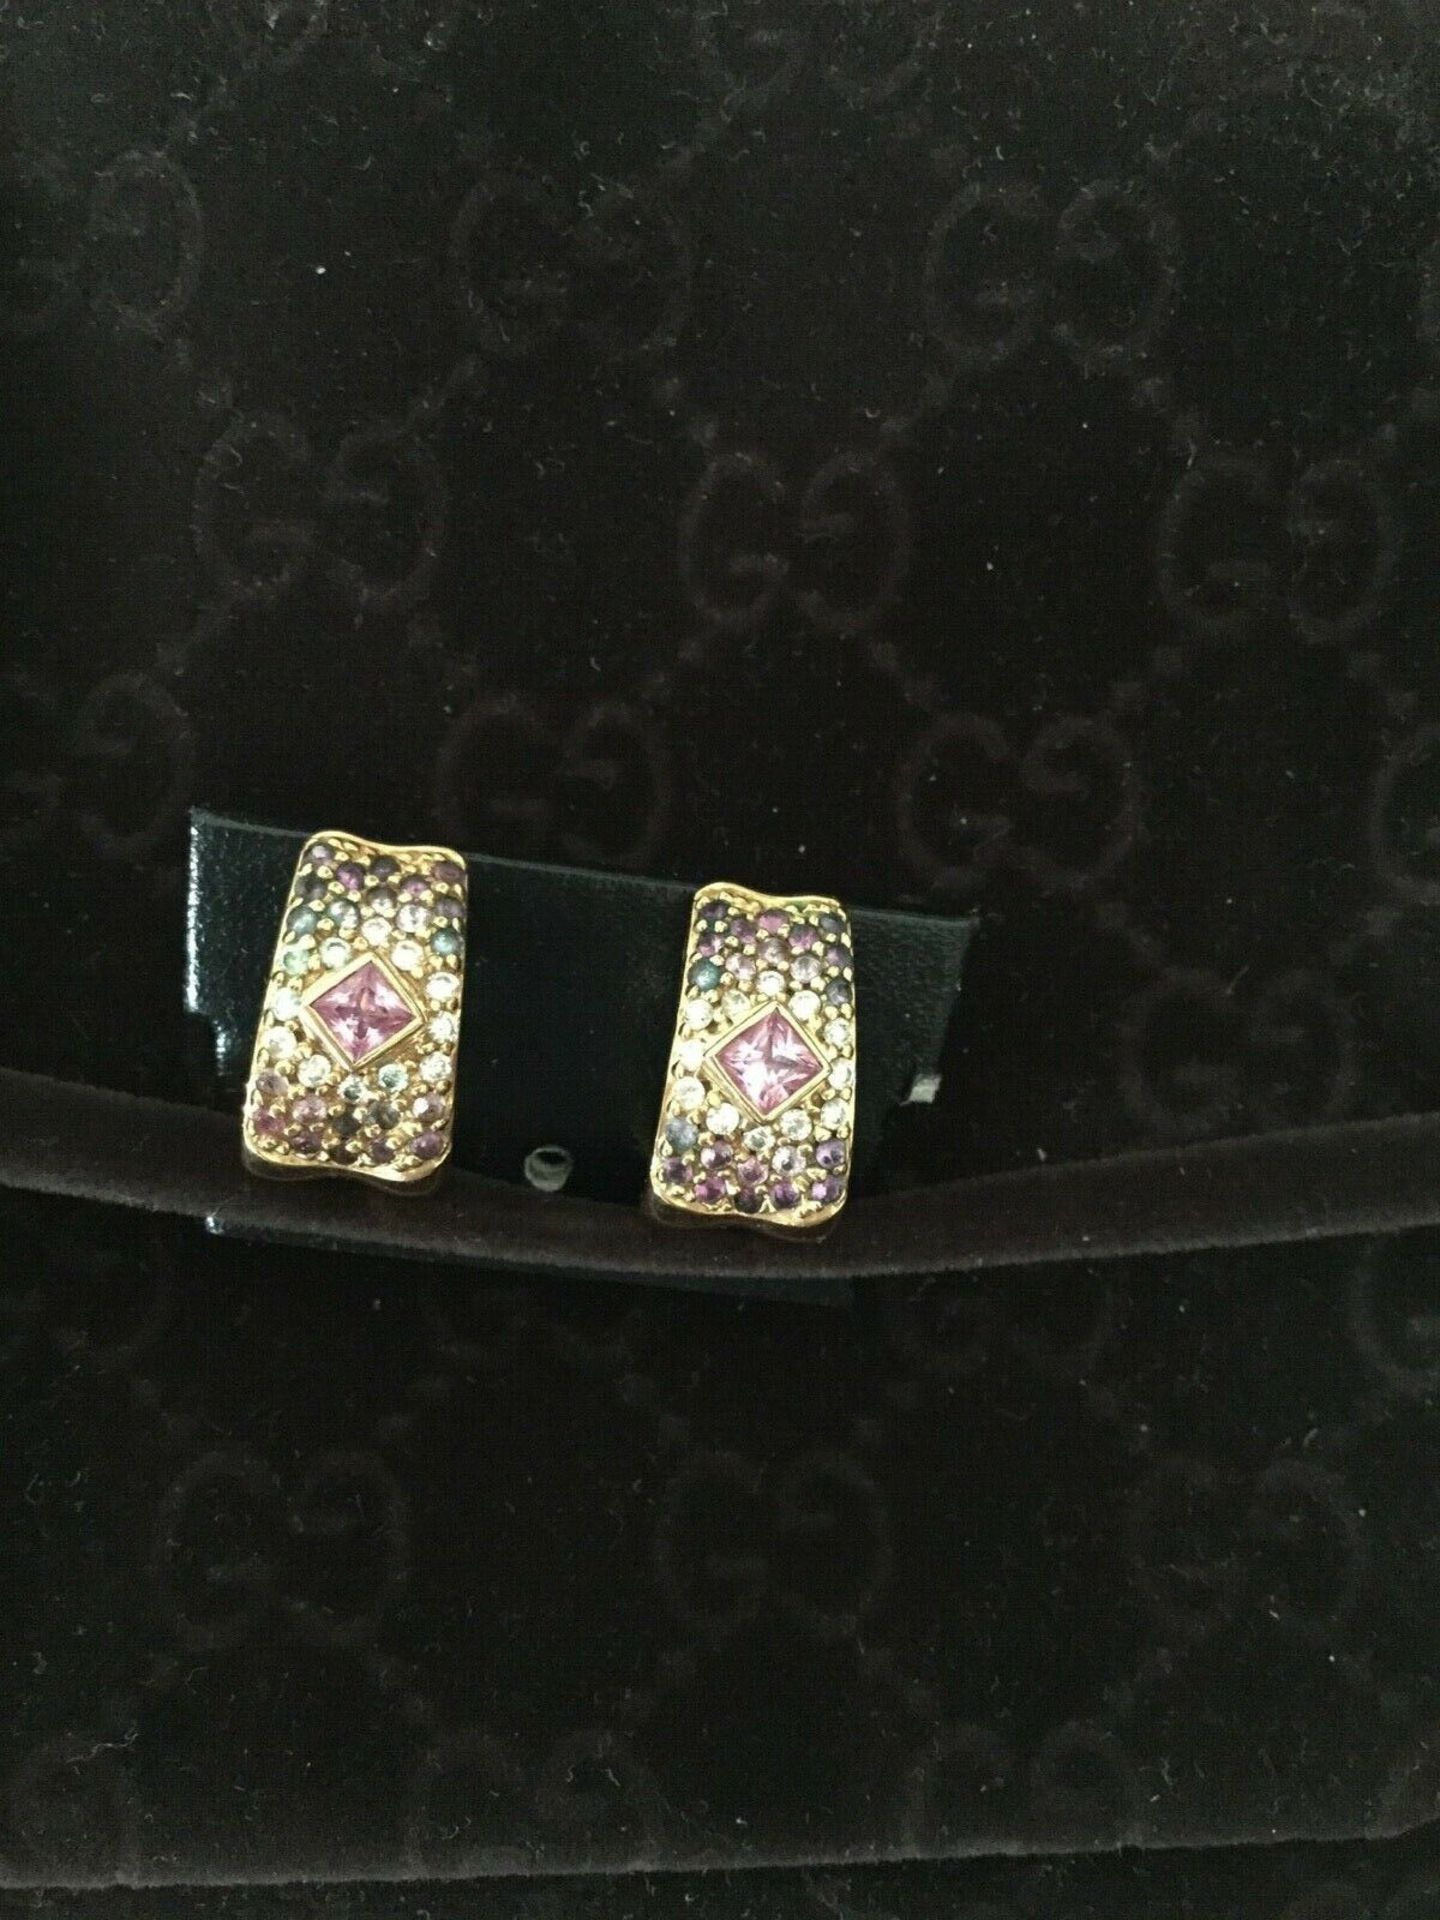 18Ct Gold Diamond And Pink Sapphire Earrings - Image 4 of 9